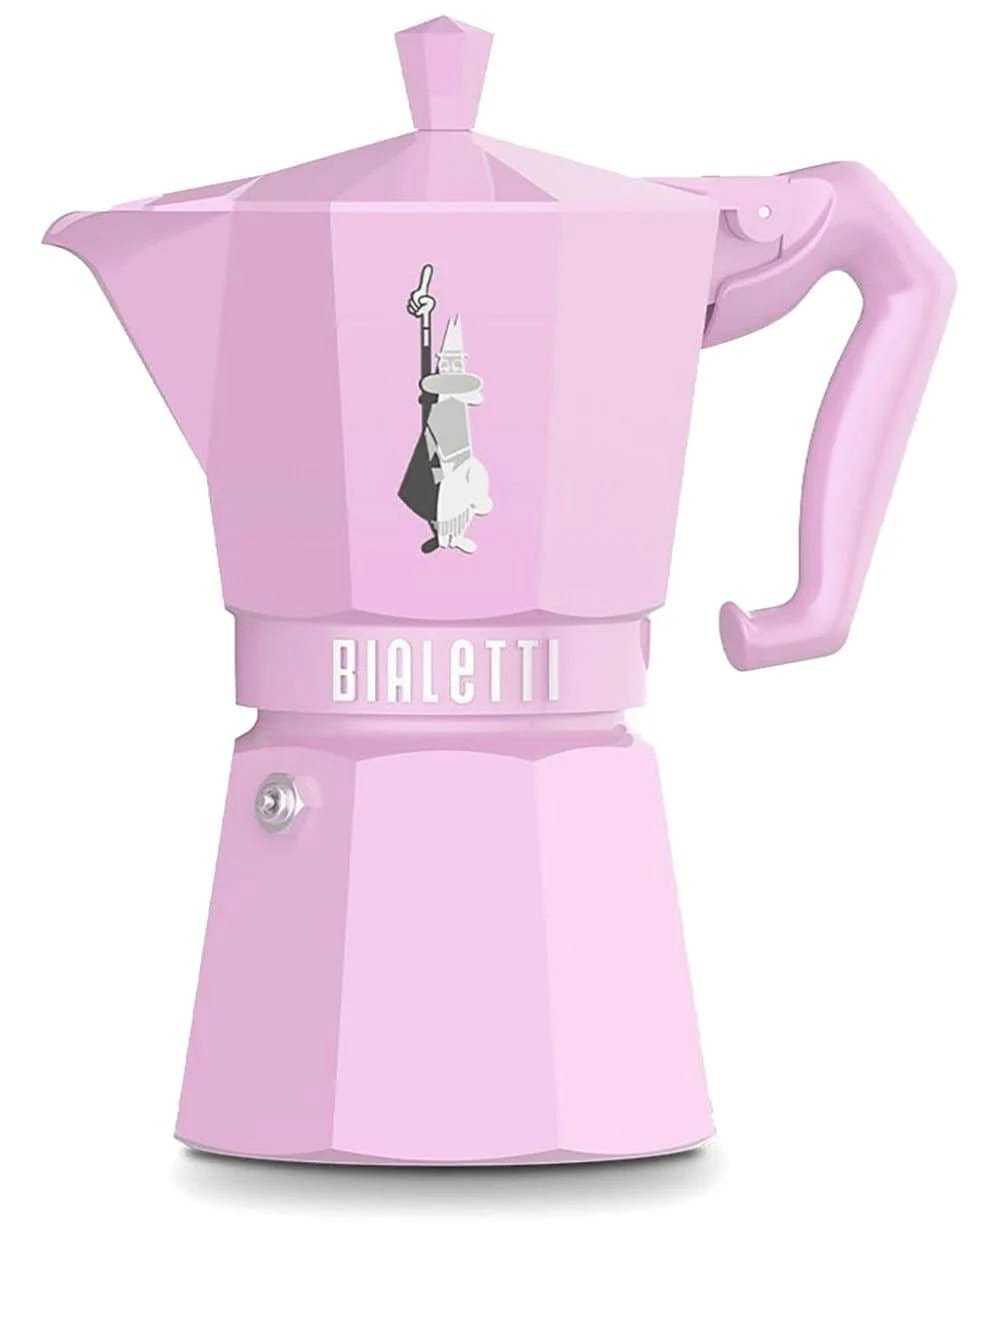 Stylish Pink Moka Express Coffee Maker for Induction Hobs | Image